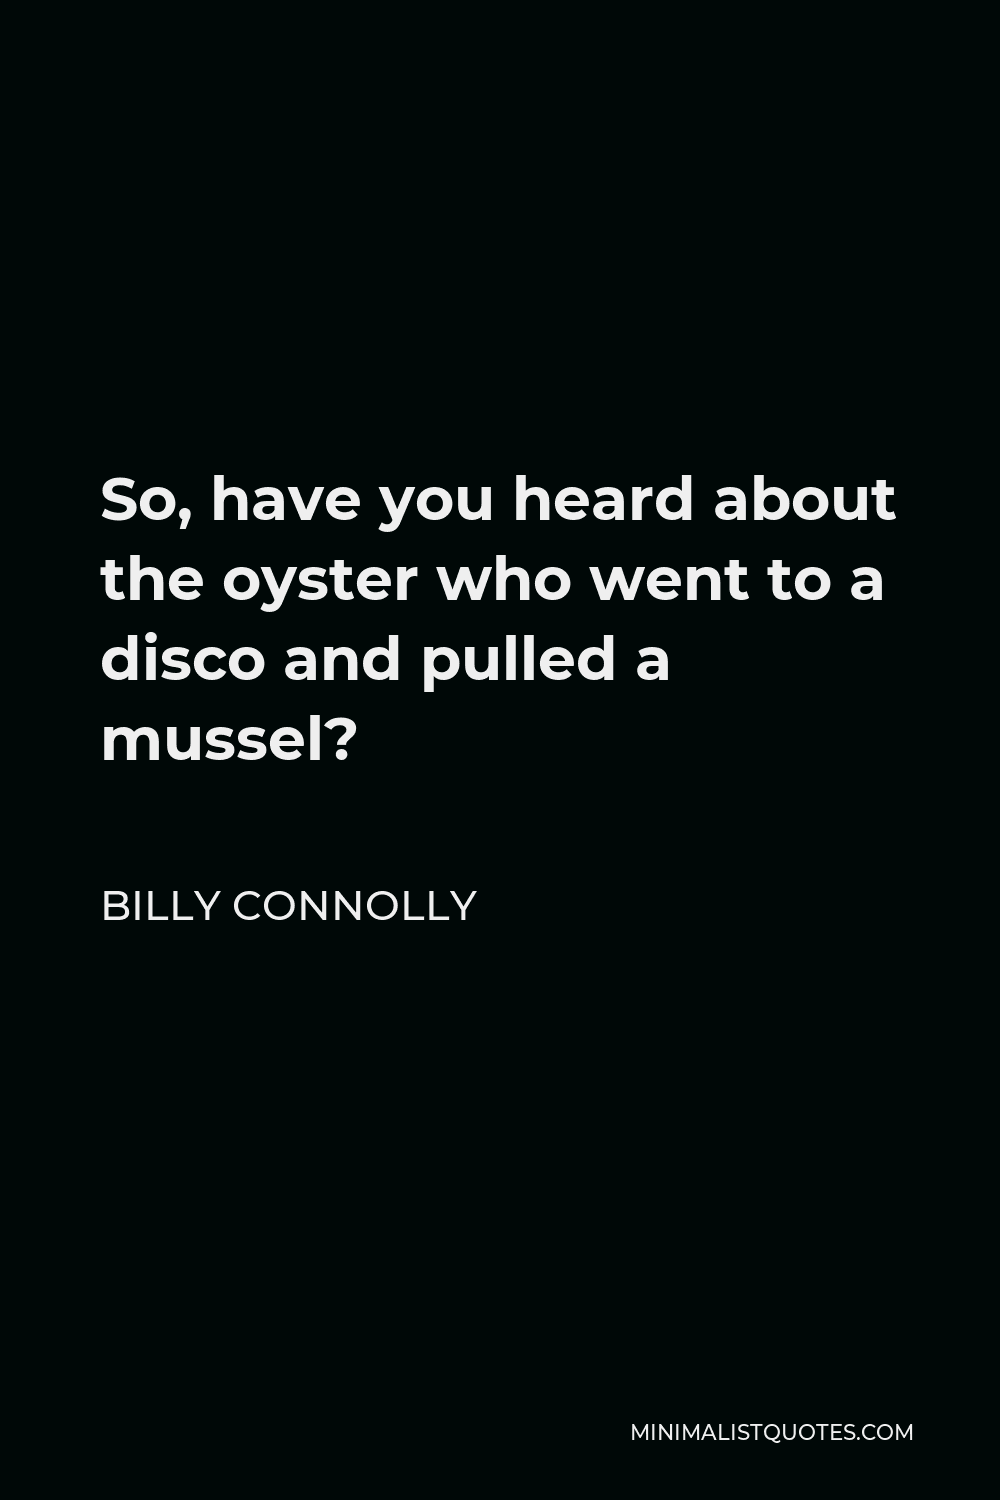 Billy Connolly Quote - So, have you heard about the oyster who went to a disco and pulled a mussel?